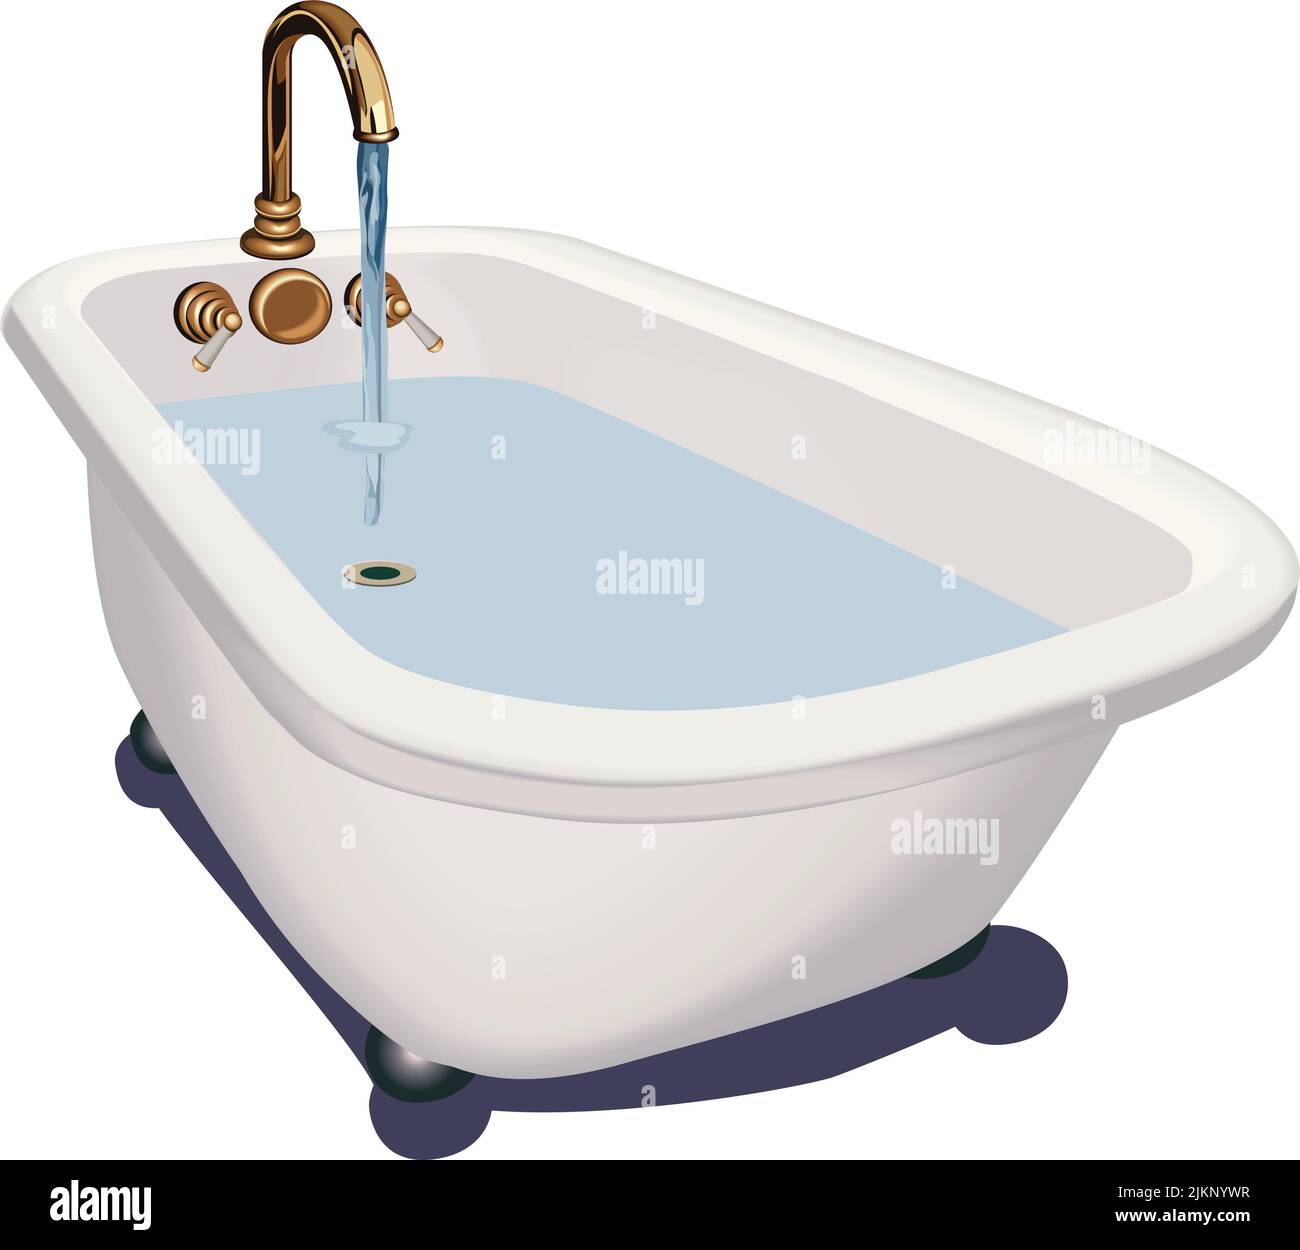 half full antique bathtub with feet and taps Stock Vector